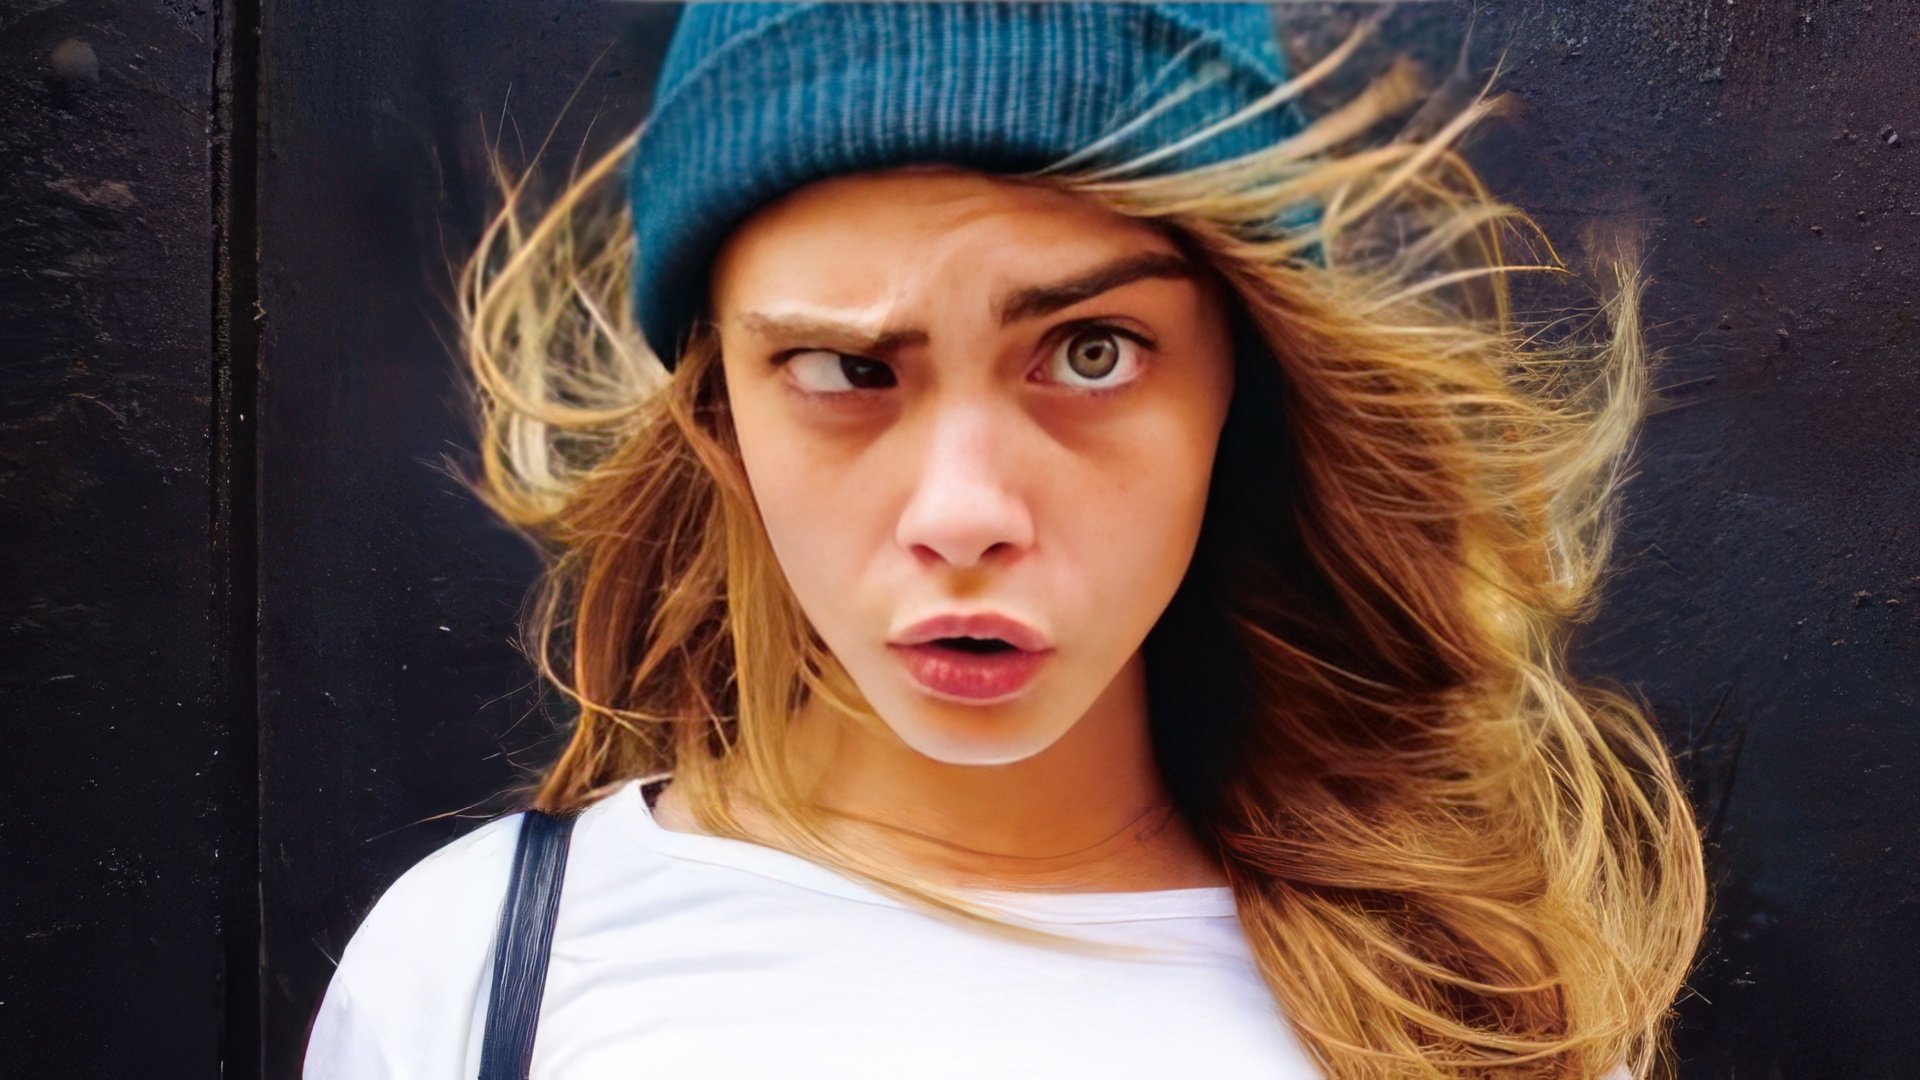 Cara Delevingne has her own style